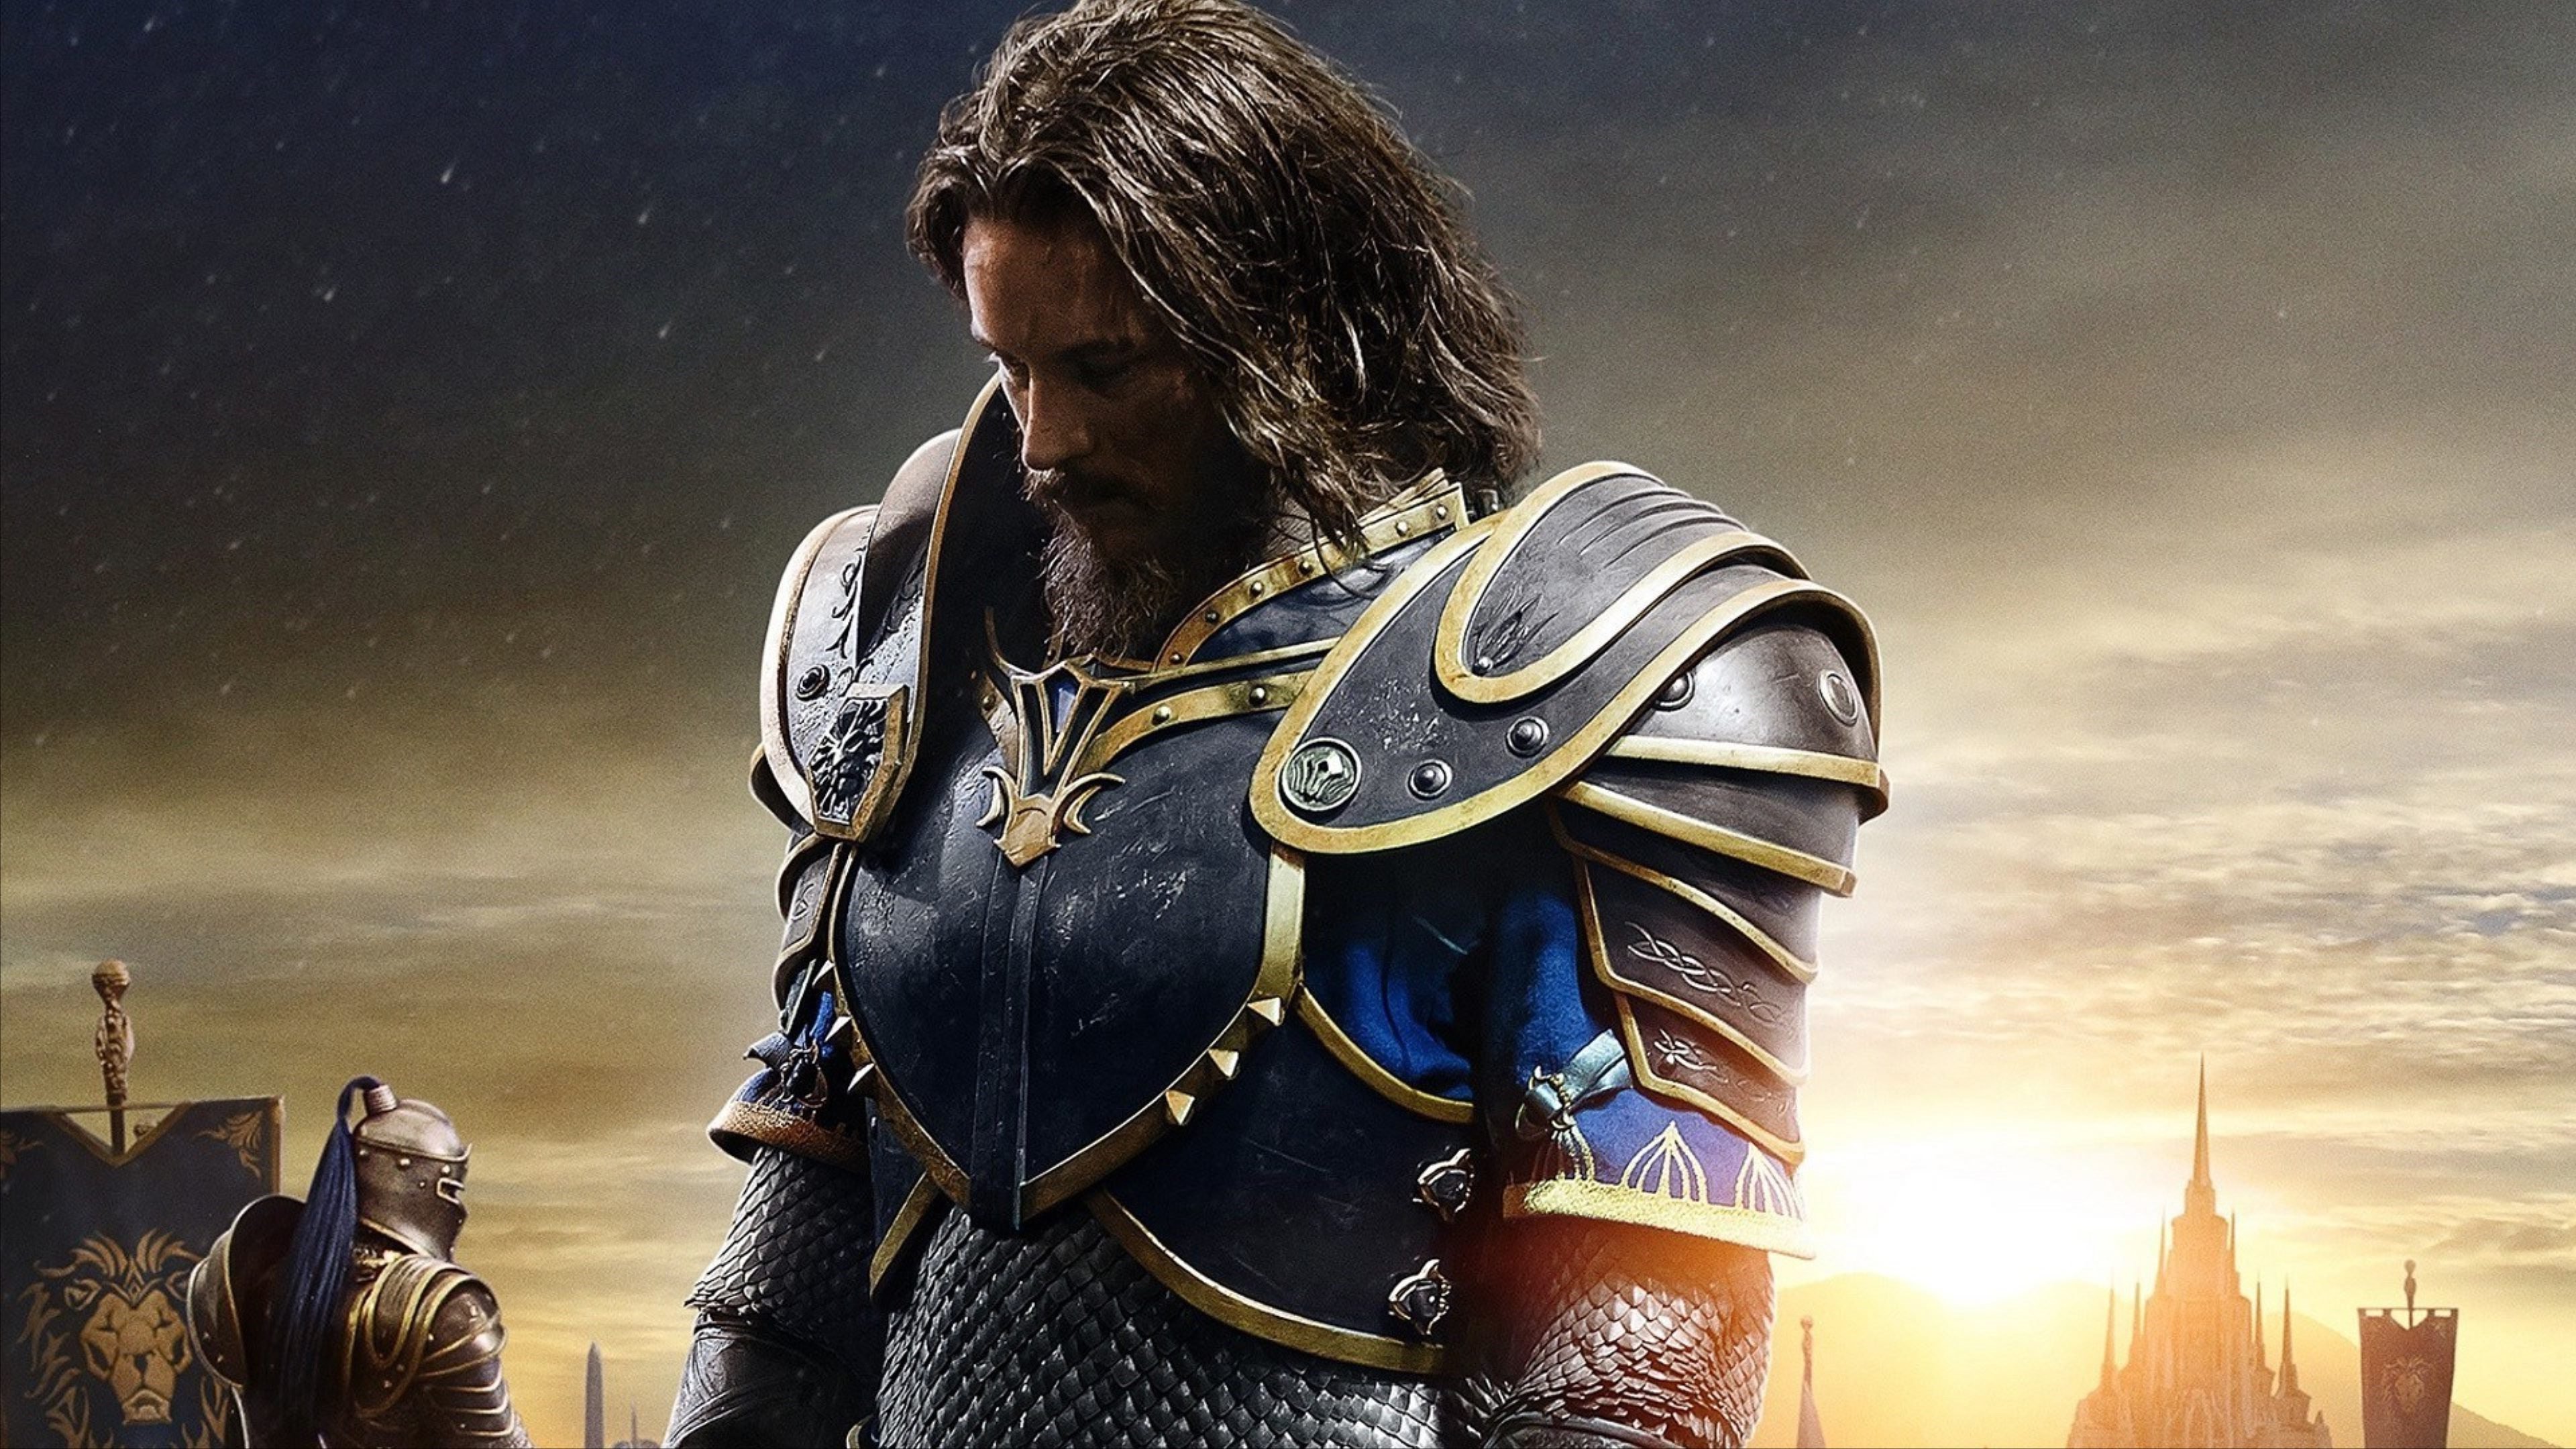 anduin-lothar-in-warcraft-movie